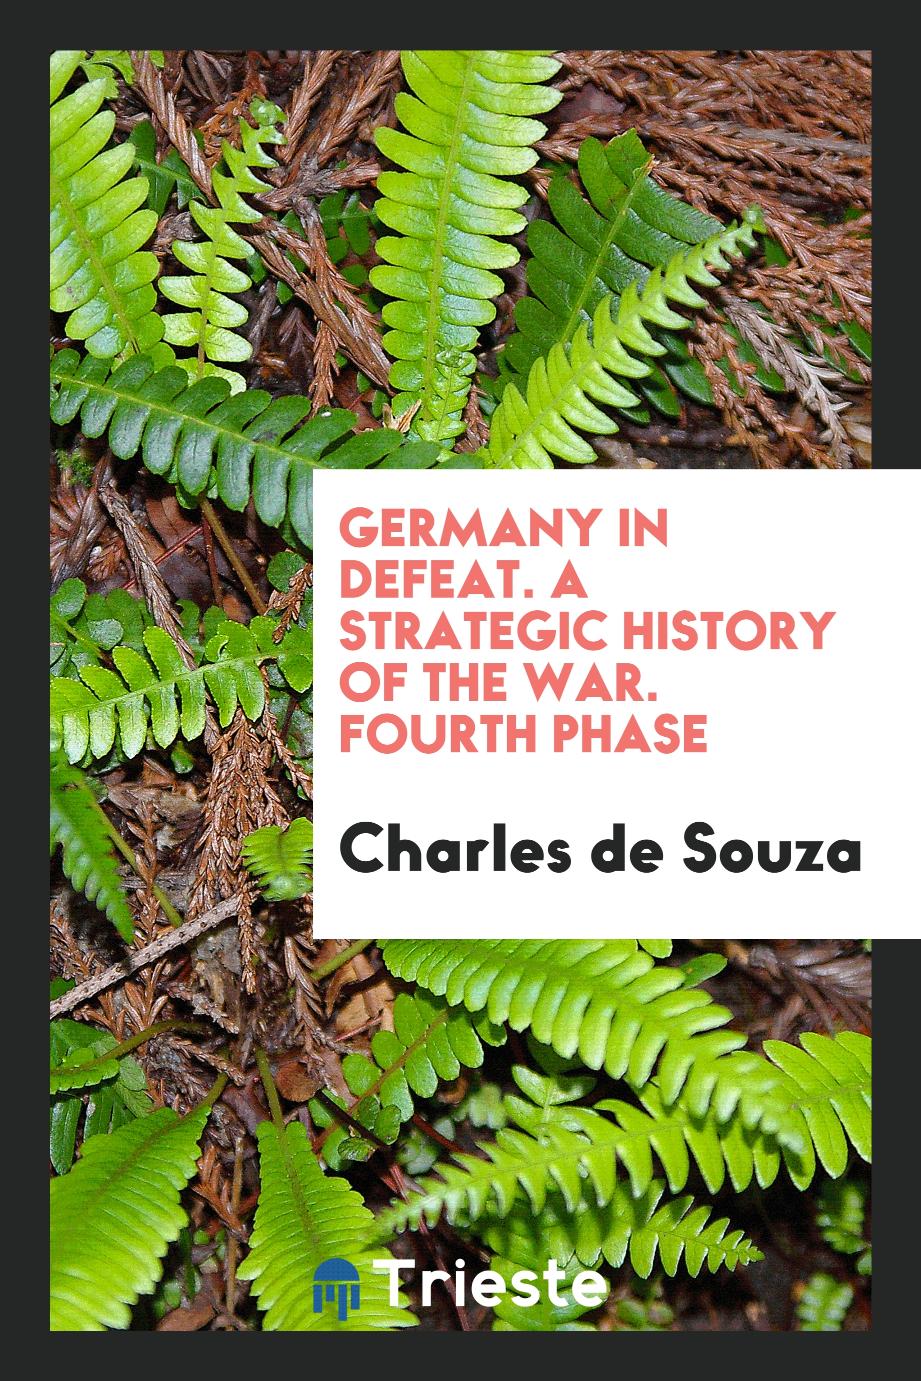 Germany in defeat. A strategic history of the War. Fourth Phase